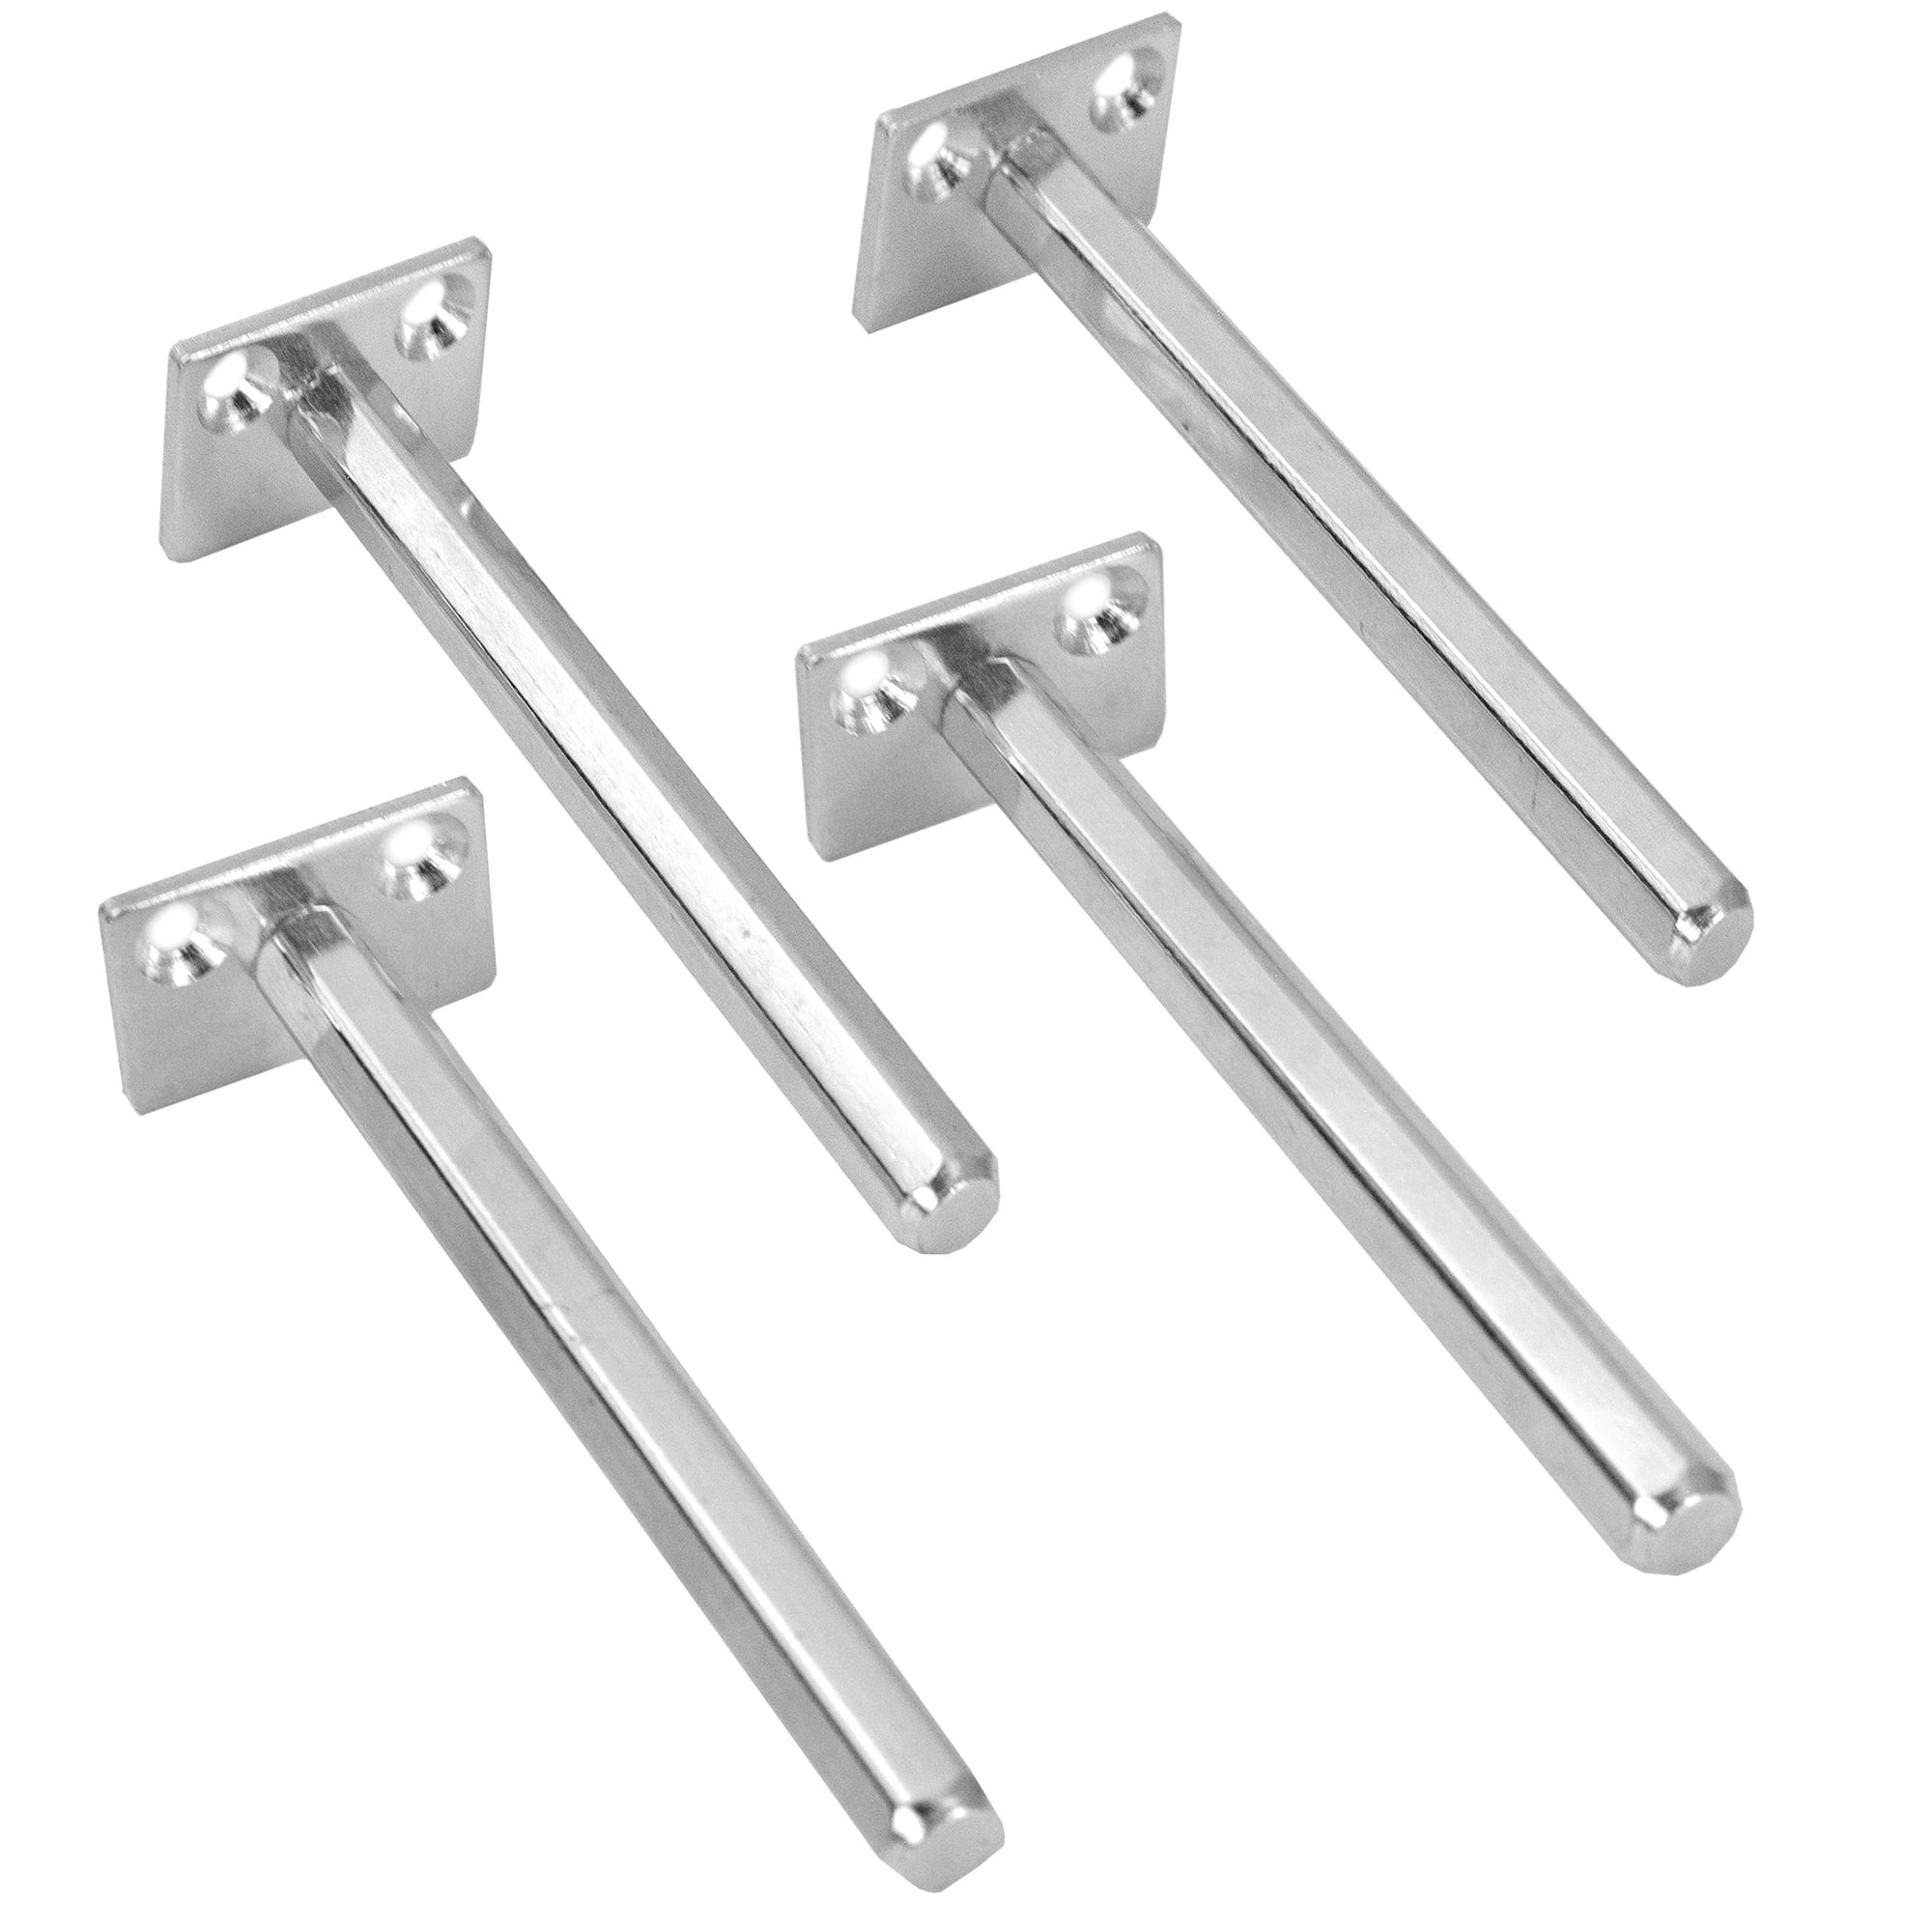 Heavy Duty Floating Shelf Support for Wall Mounted Decoration Cabinet Furniture Shelf Support Floating Shelf Brackets 4pcs Stainless Steel Invisible Shelf Supports 3 T Bracket with Screws Hidden